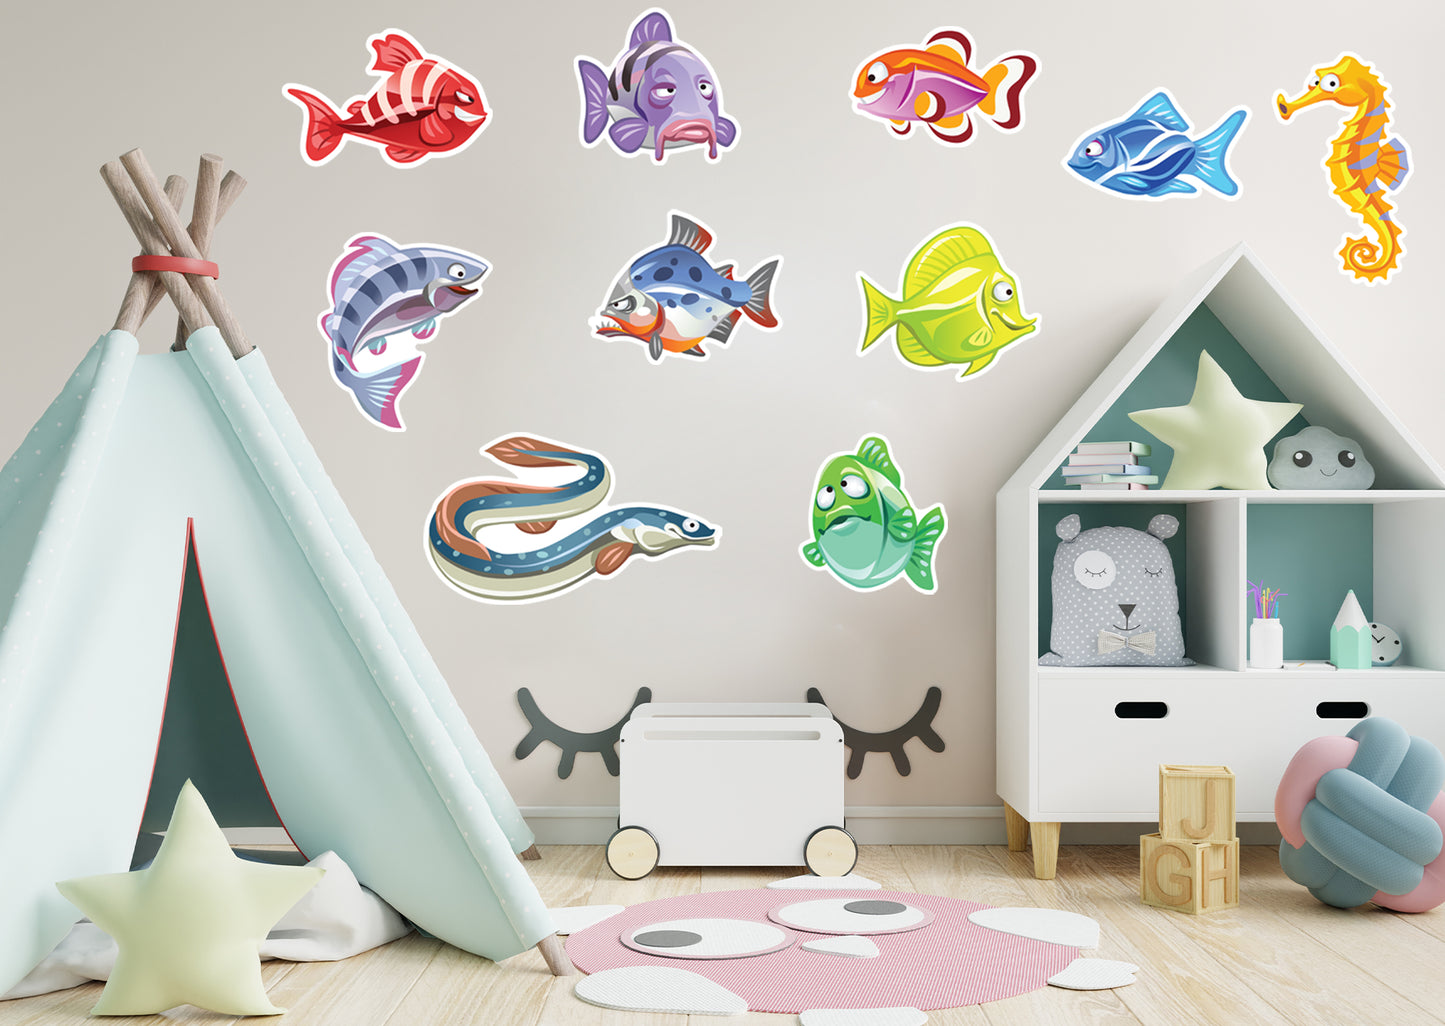 Nursery:  Aquatic Creatures Part 3 Collection        -   Removable Wall   Adhesive Decal